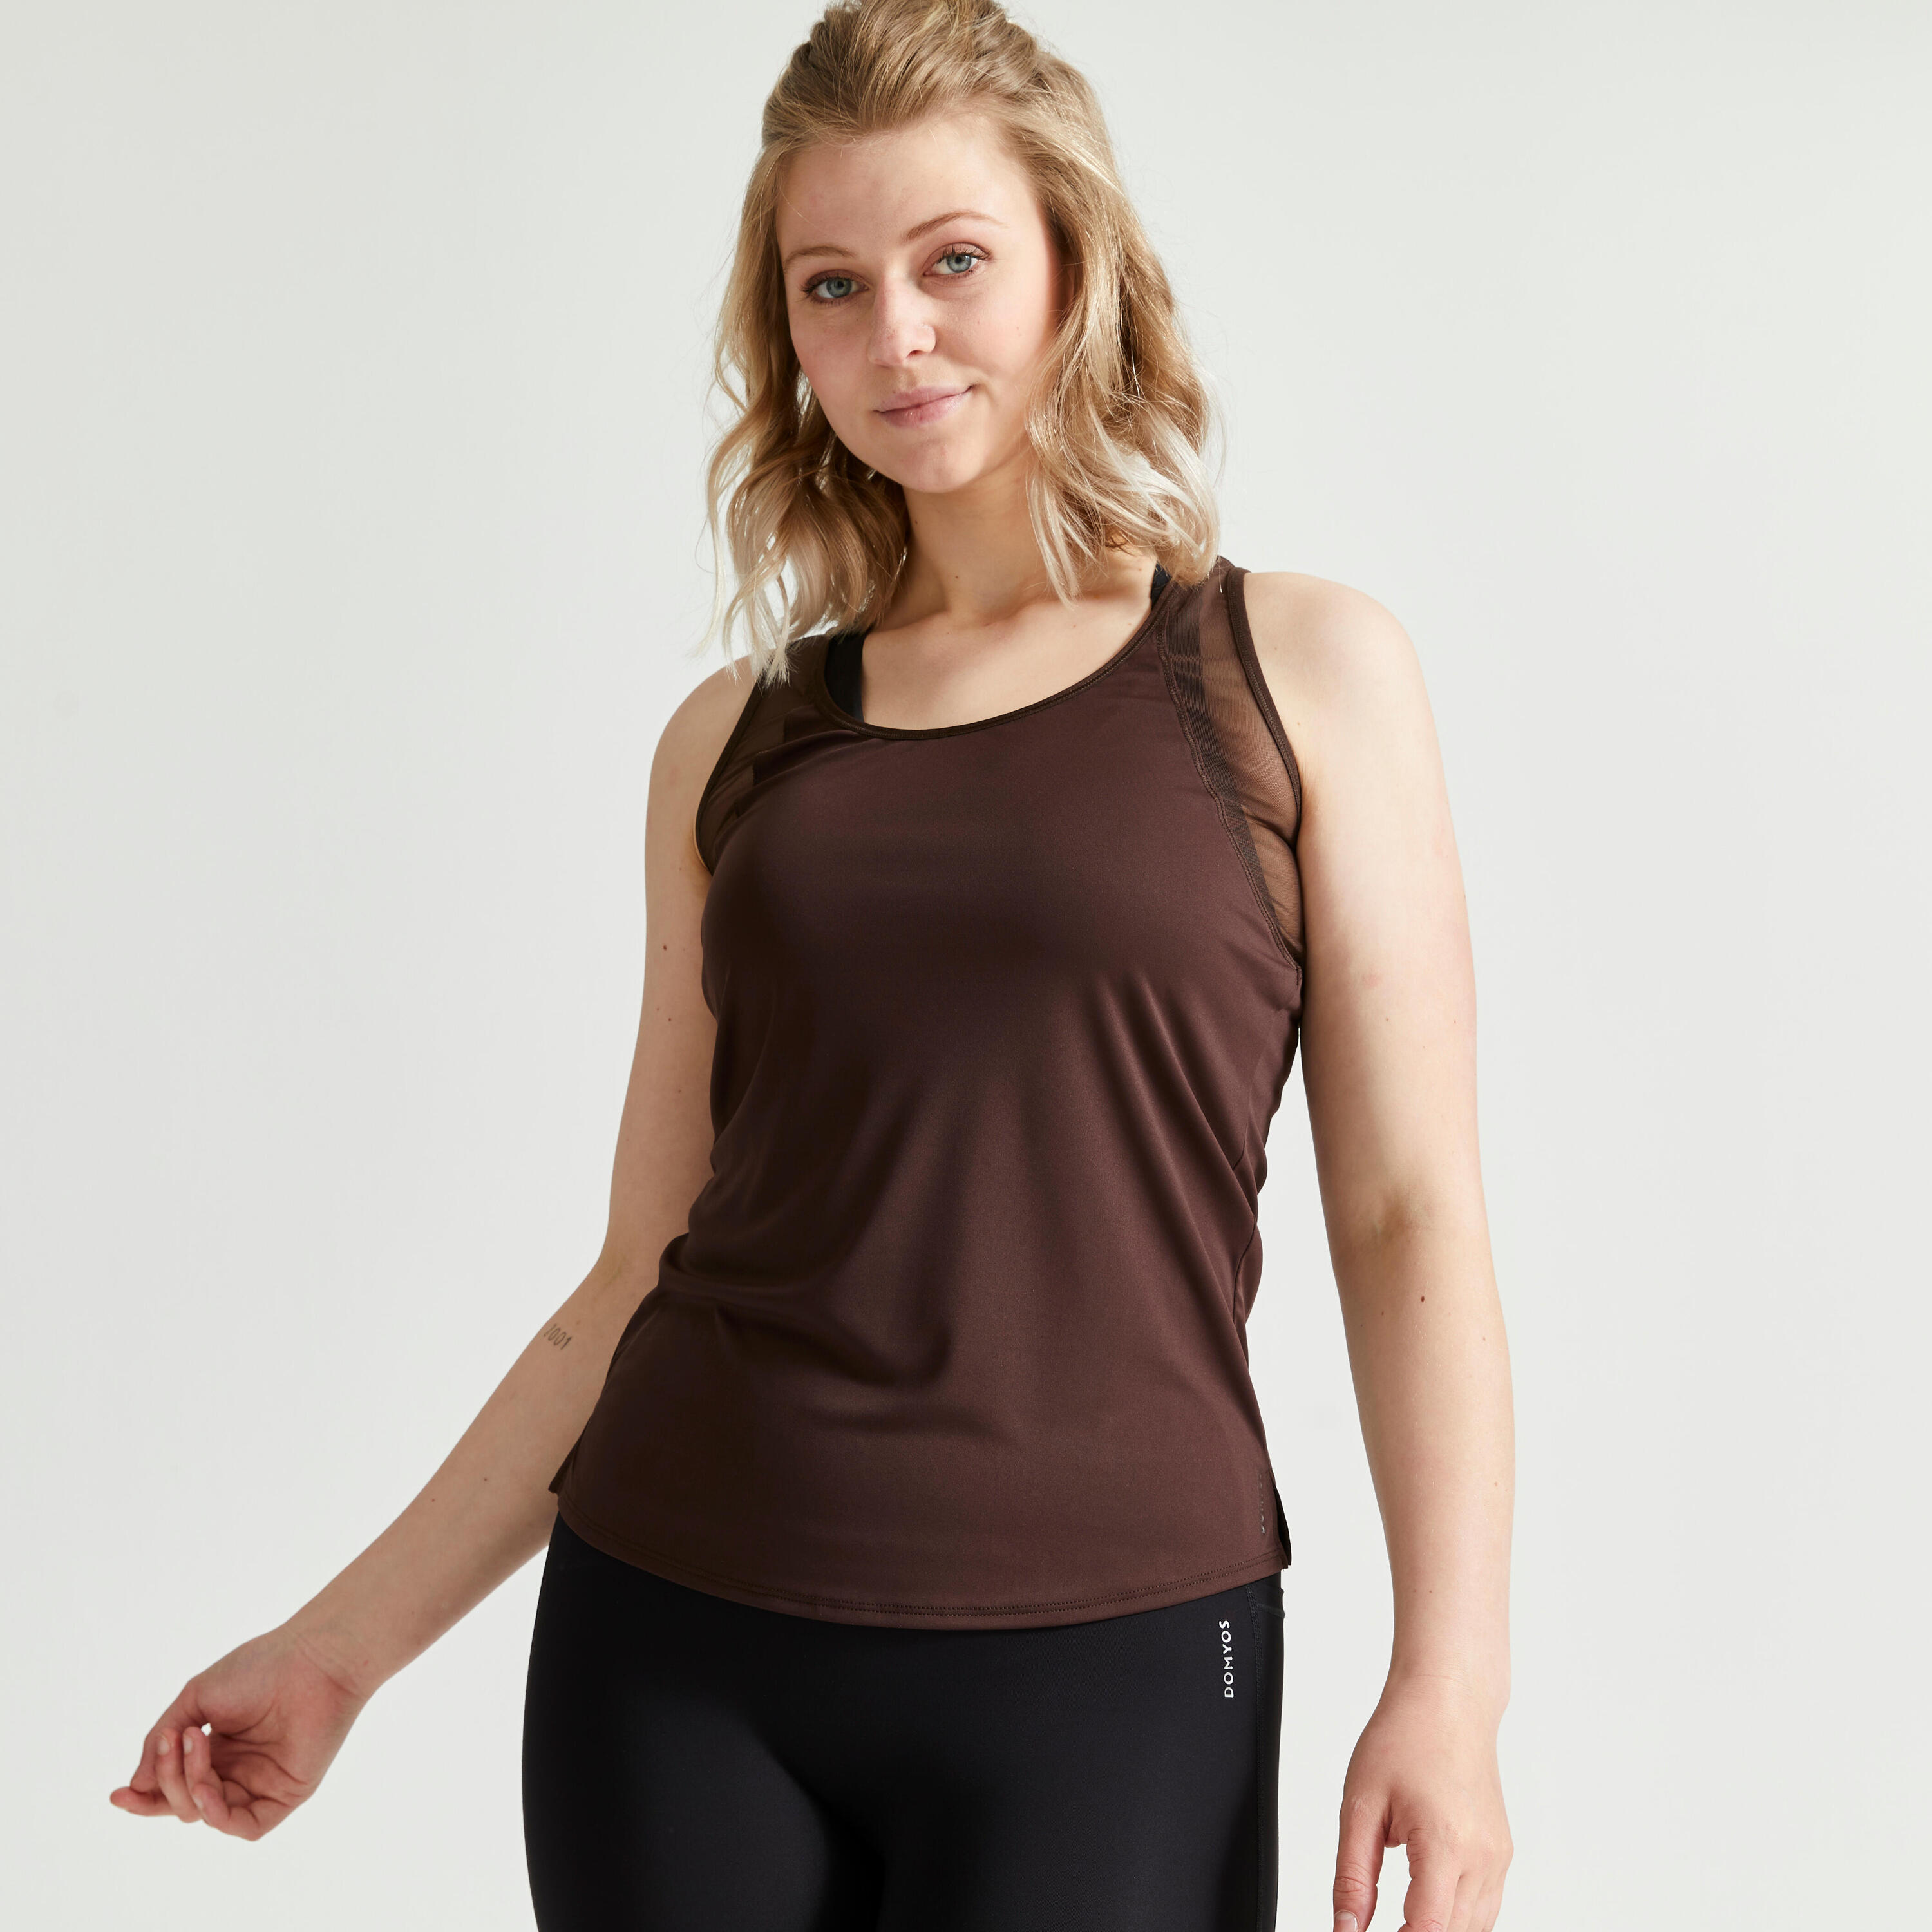 DOMYOS Women's Muscle Back Fitness Cardio Tank Top - Brown